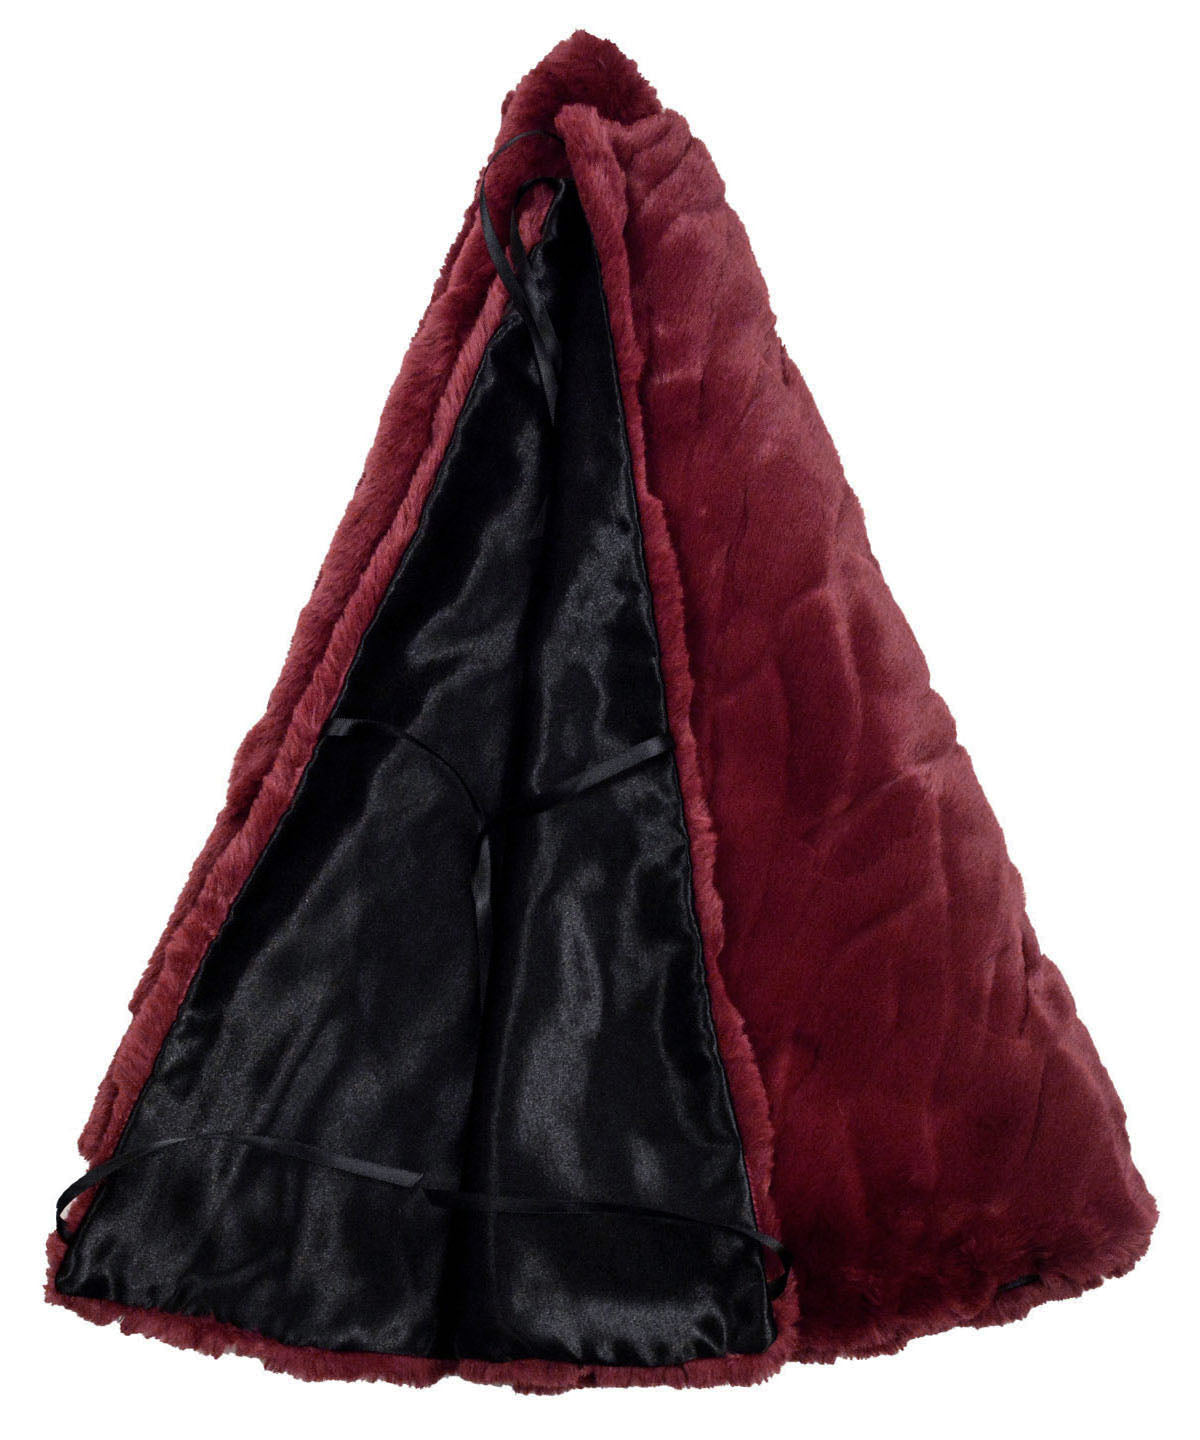 Tree Skirt - Luxury Faux Fur in Cranberry Creek - Sold Out!